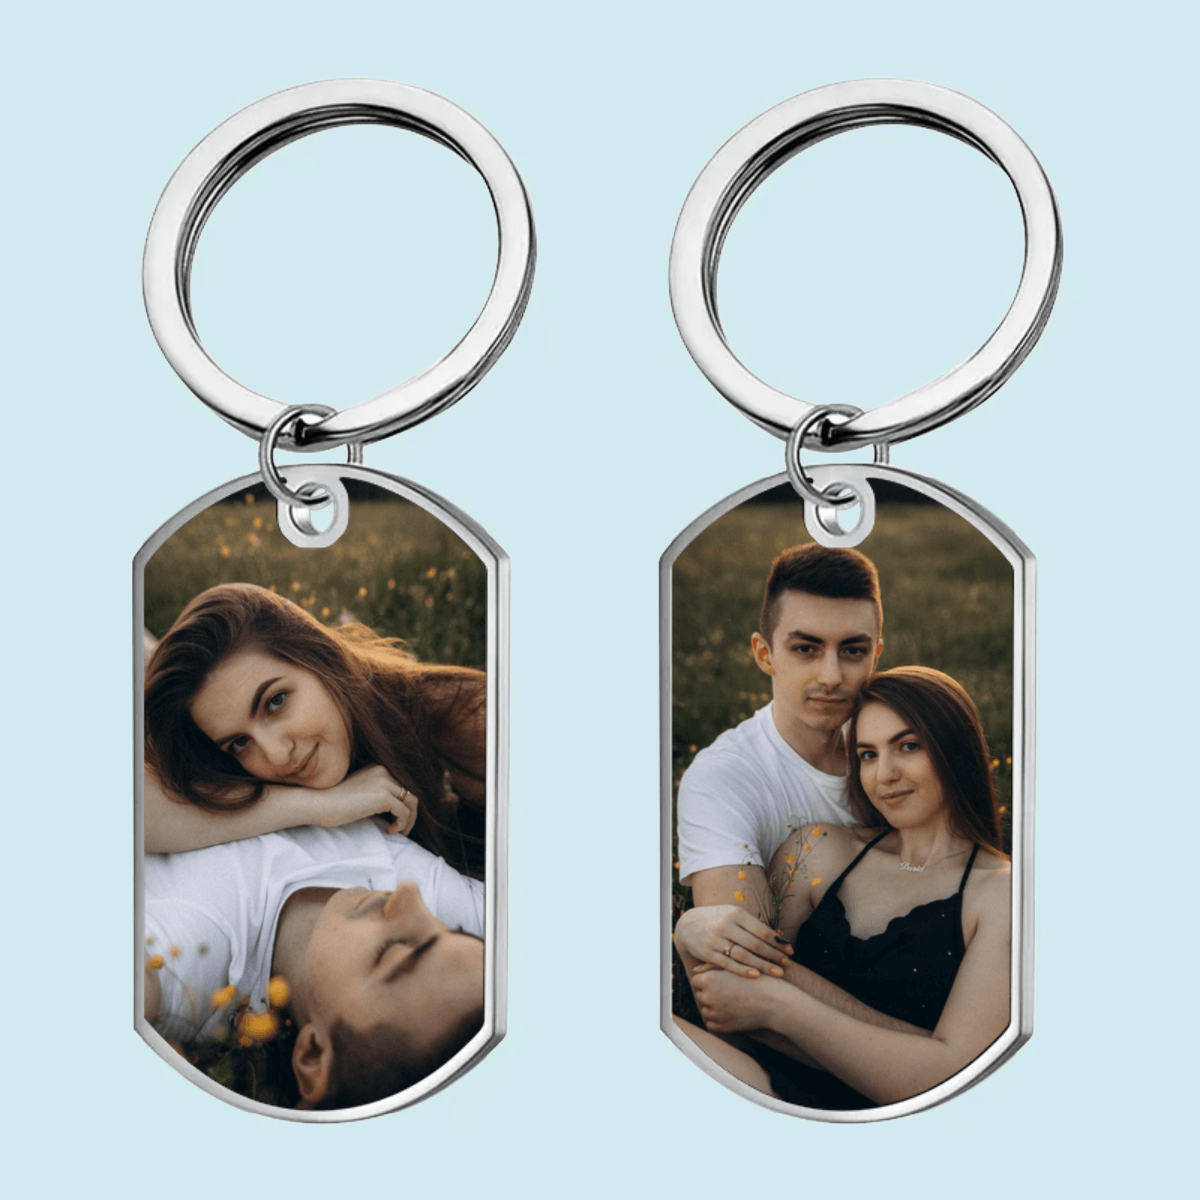 Custom Photo Keychain - Personalized Gift For Boyfriend, Girlfriend, Her, Him, Couples | Best for Anniversary, Valentine, Engagement | Stainless Steel